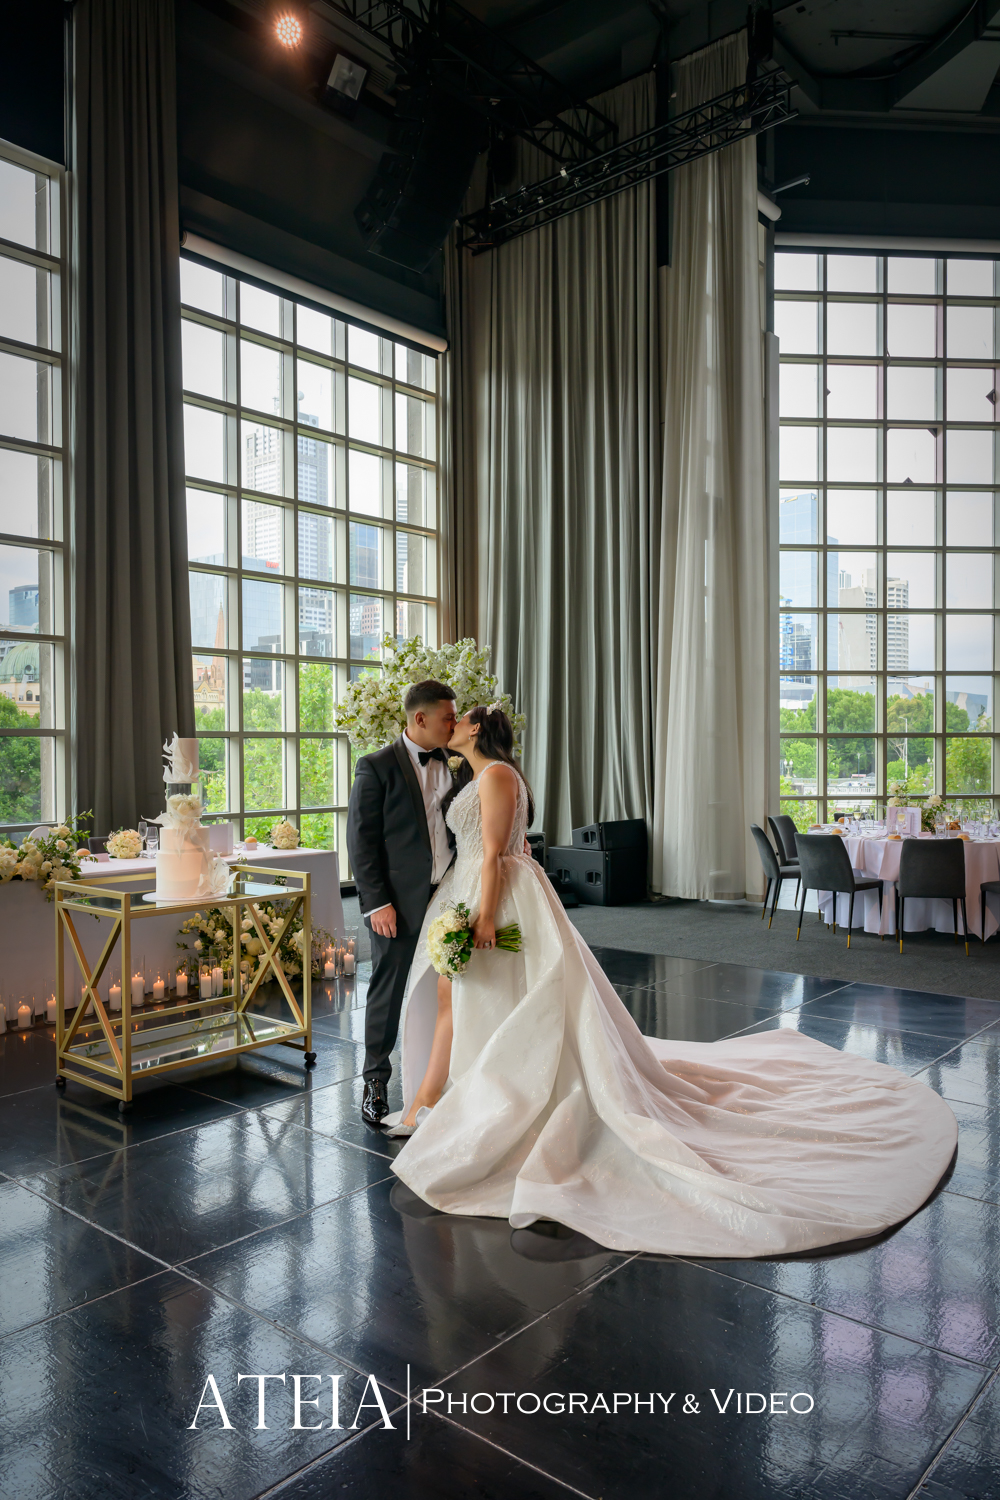 , Lauren and Jake&#8217;s wedding photography at Metropolis Events captured by ATEIA Photography &#038; Video